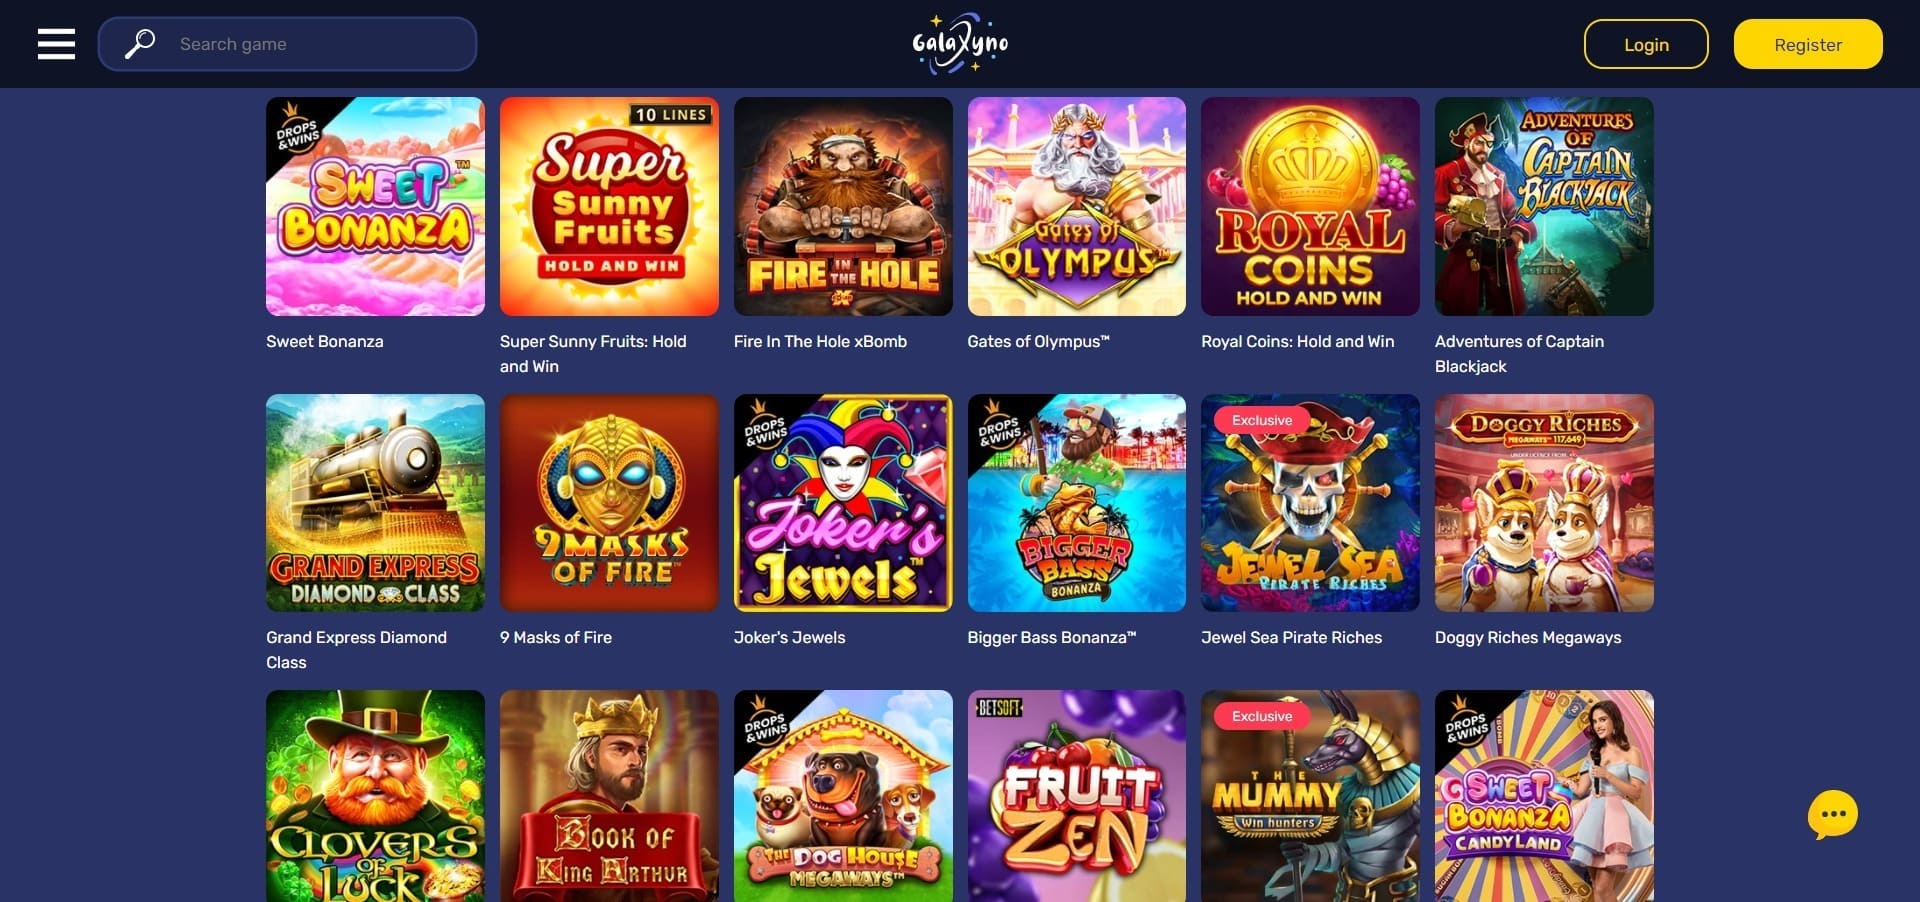 Galaxyno Casino NZ - online games and slot machines, payment options ...